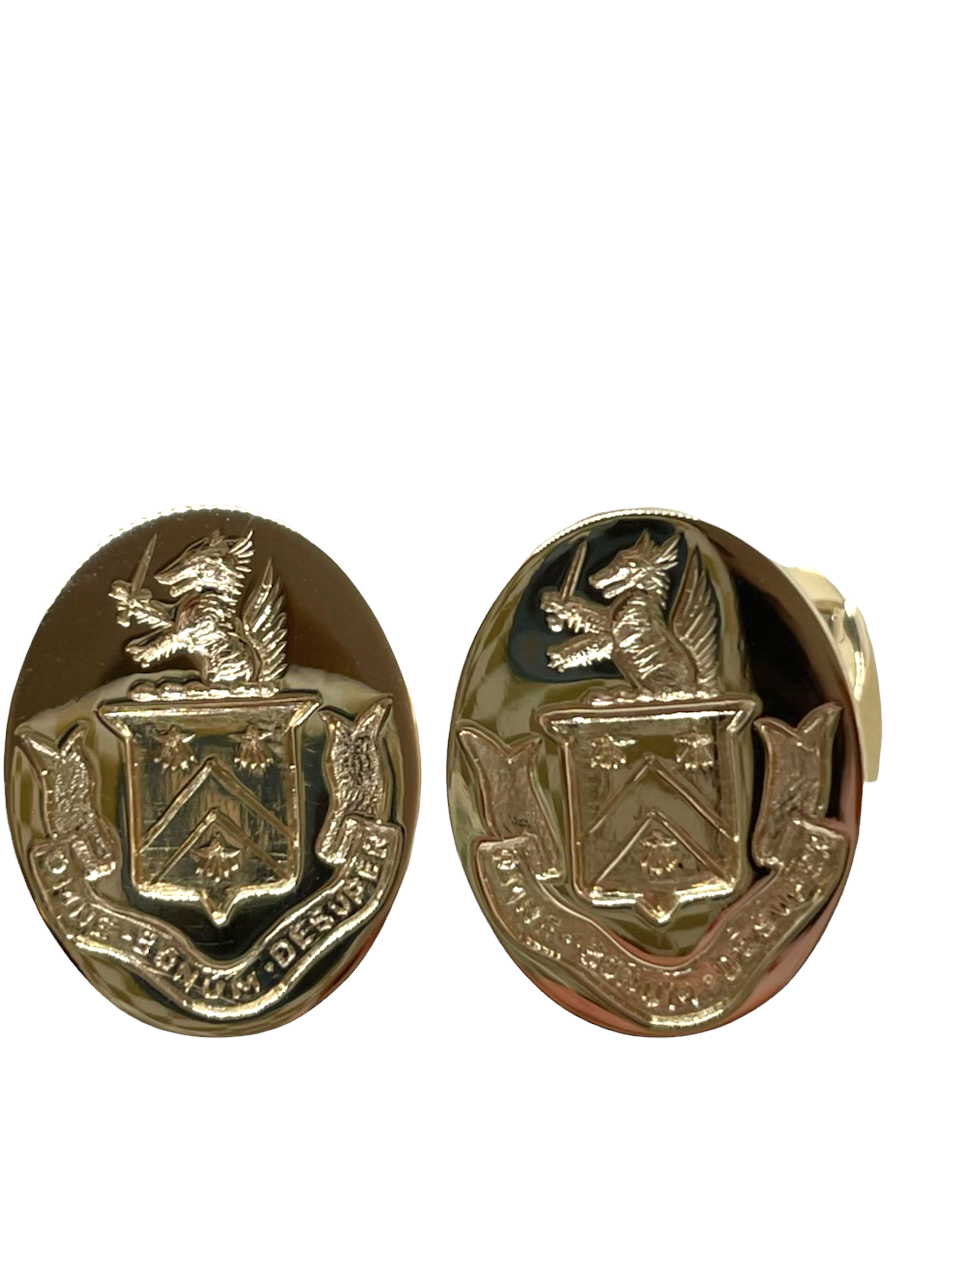 14k Yellow Gold Hand Engraved Cufflinks with Coat of Arts